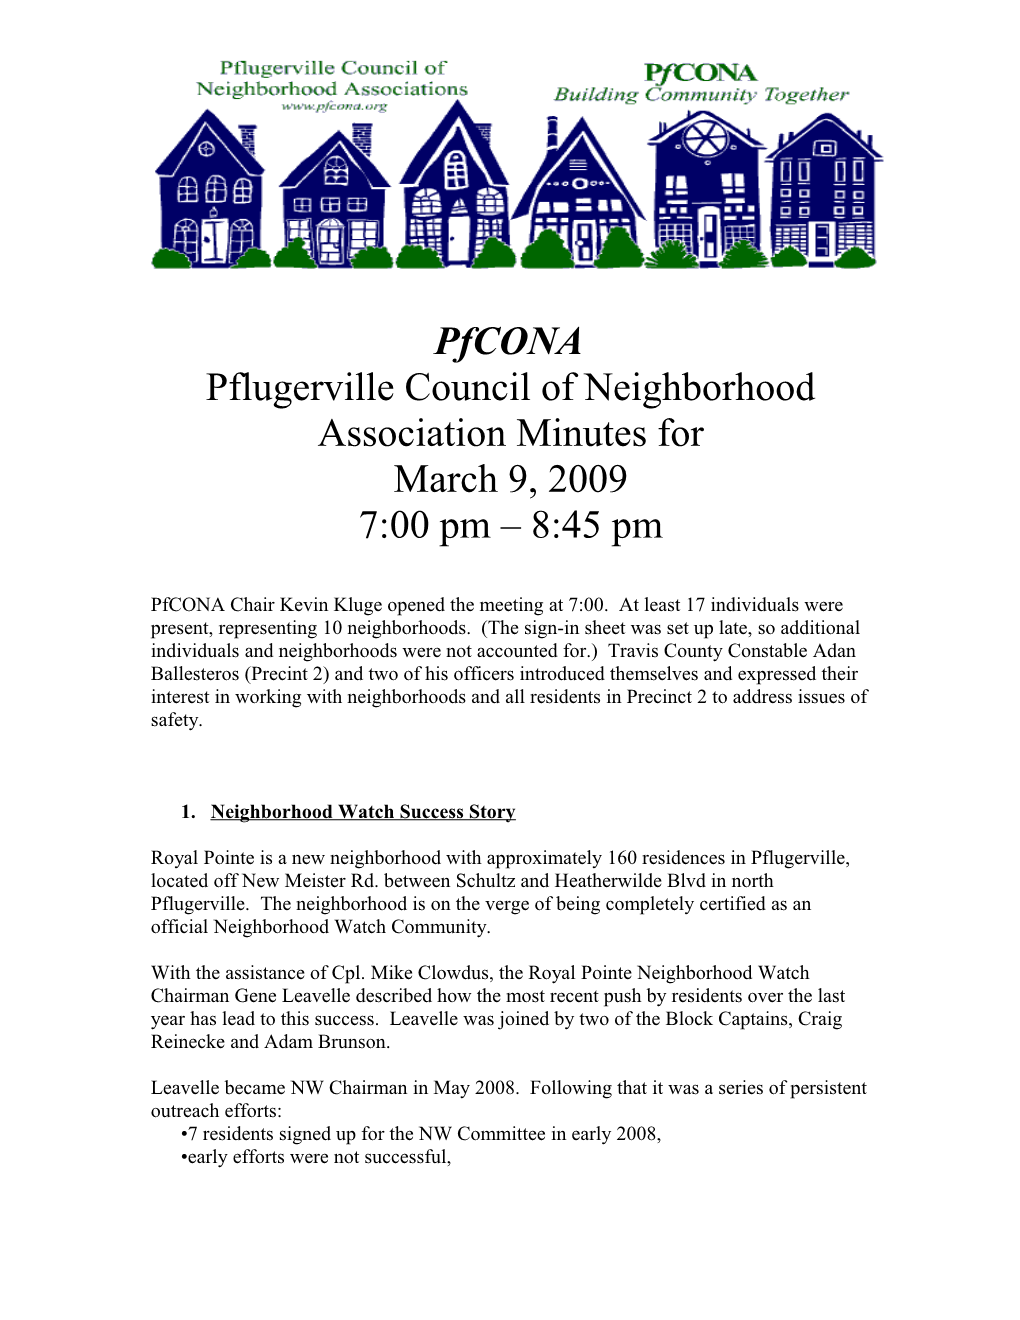 Pflugerville Council of Neighborhood Association Minutes For